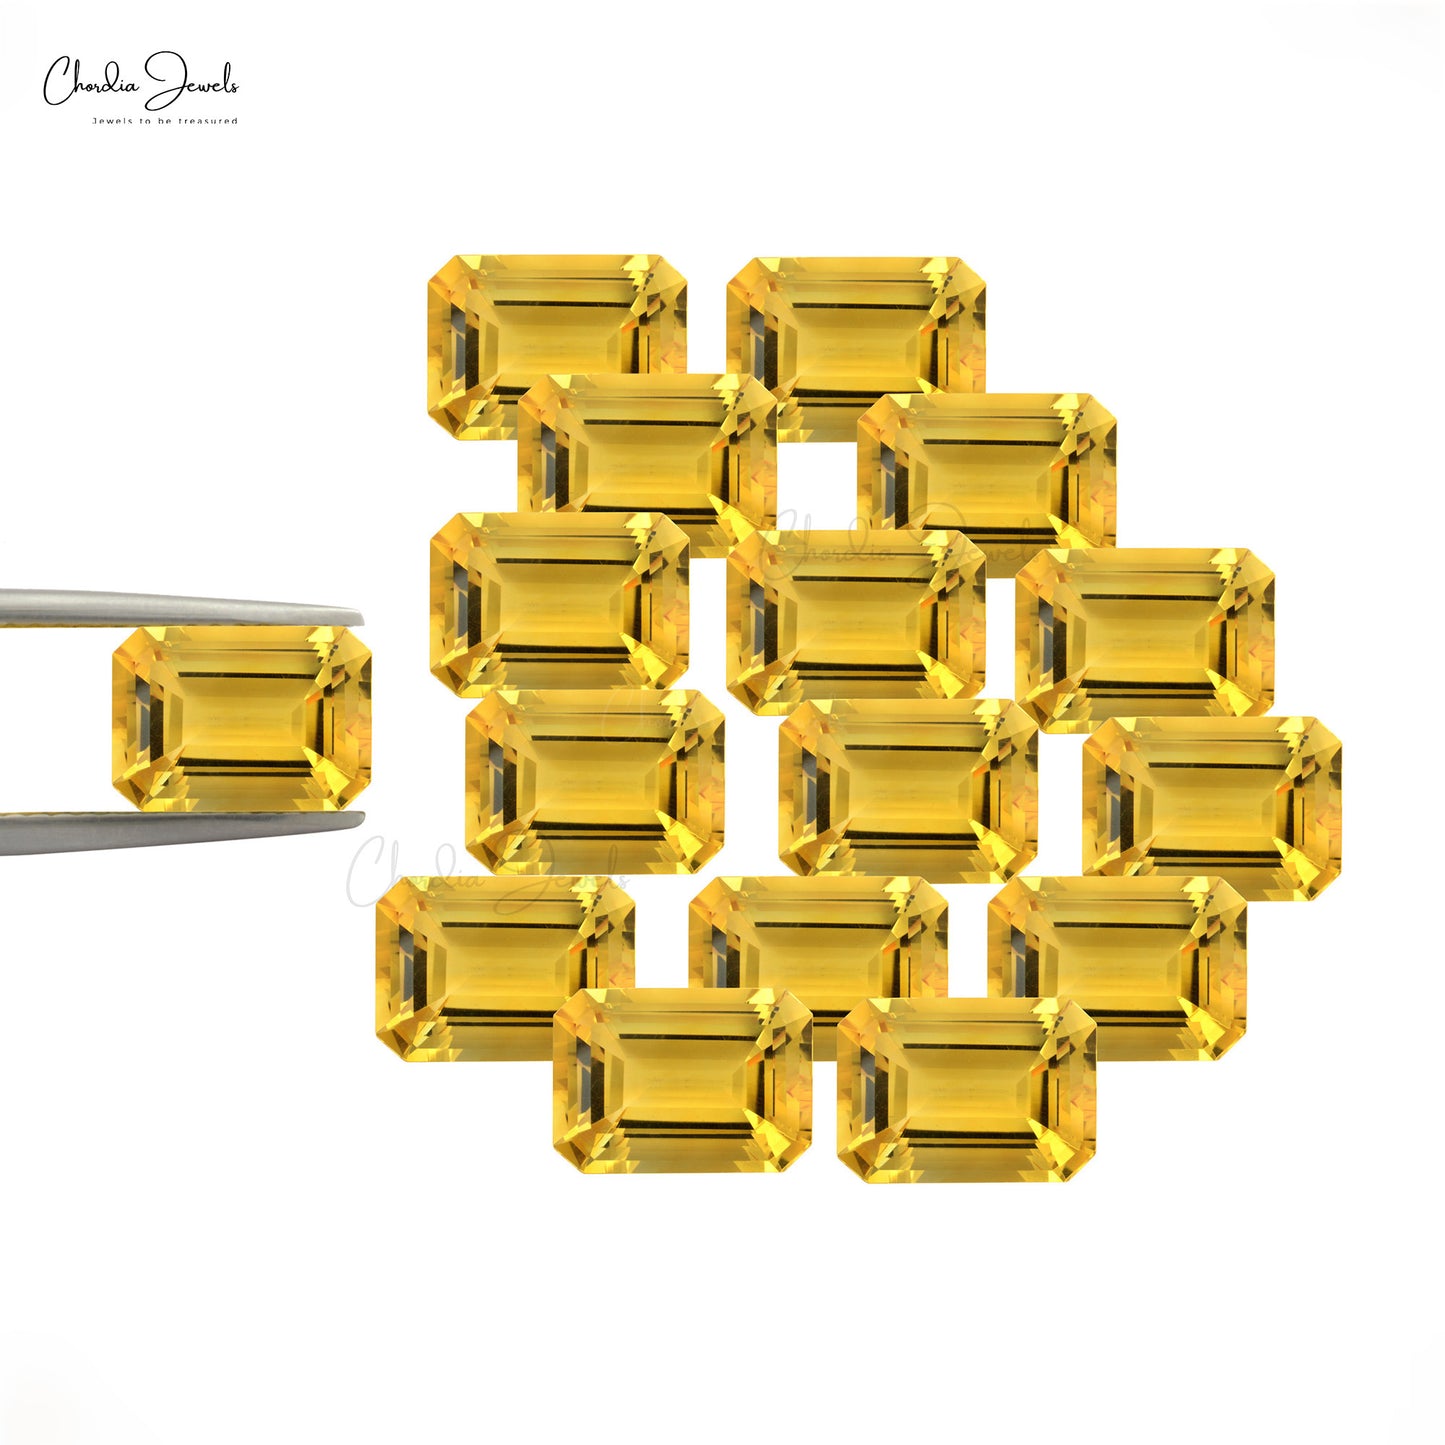 AAA Quality 100% Natural 20X15MM Citrine Gemstone at Discount Price, 1 Piece